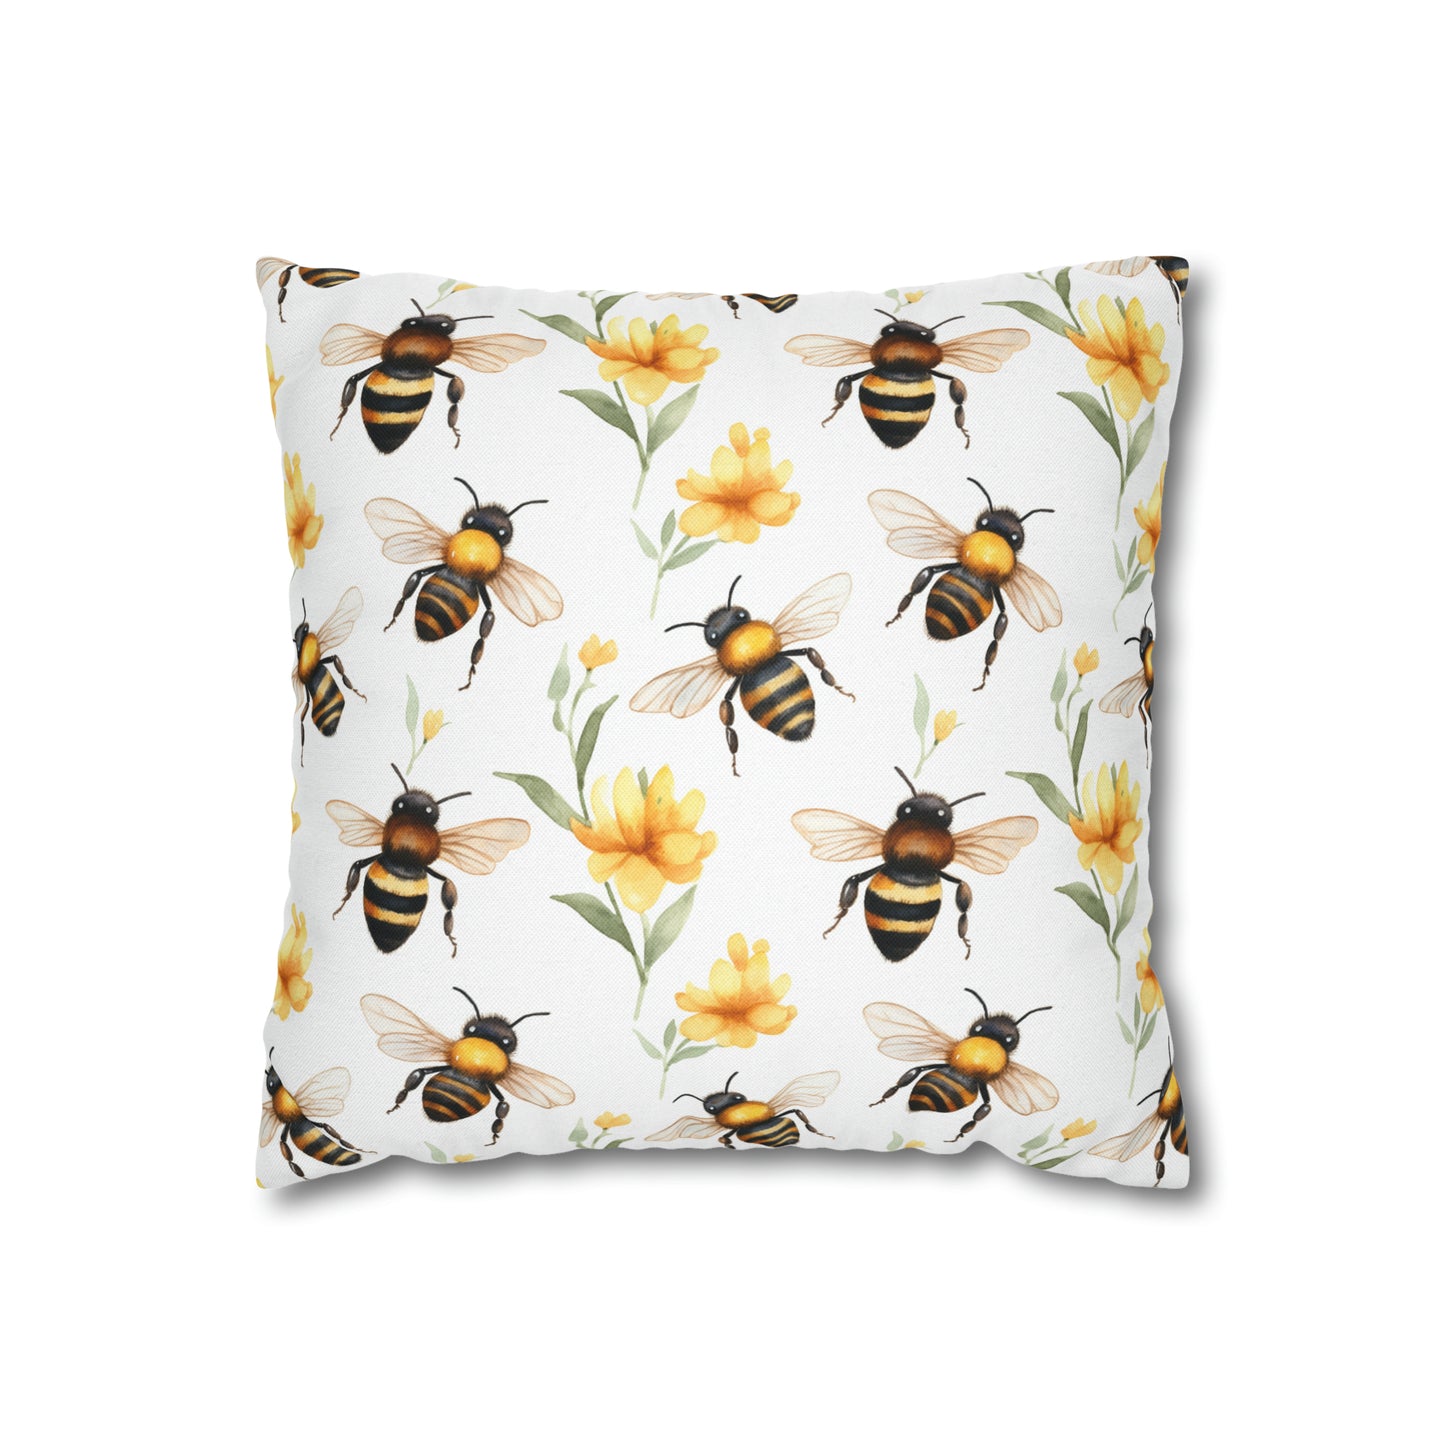 Bees Flowers Pillow Case, Yellow Floral Spring Square Throw Decorative Cover Room Decor Couch Cushion 20 x 20 Zipper Sofa